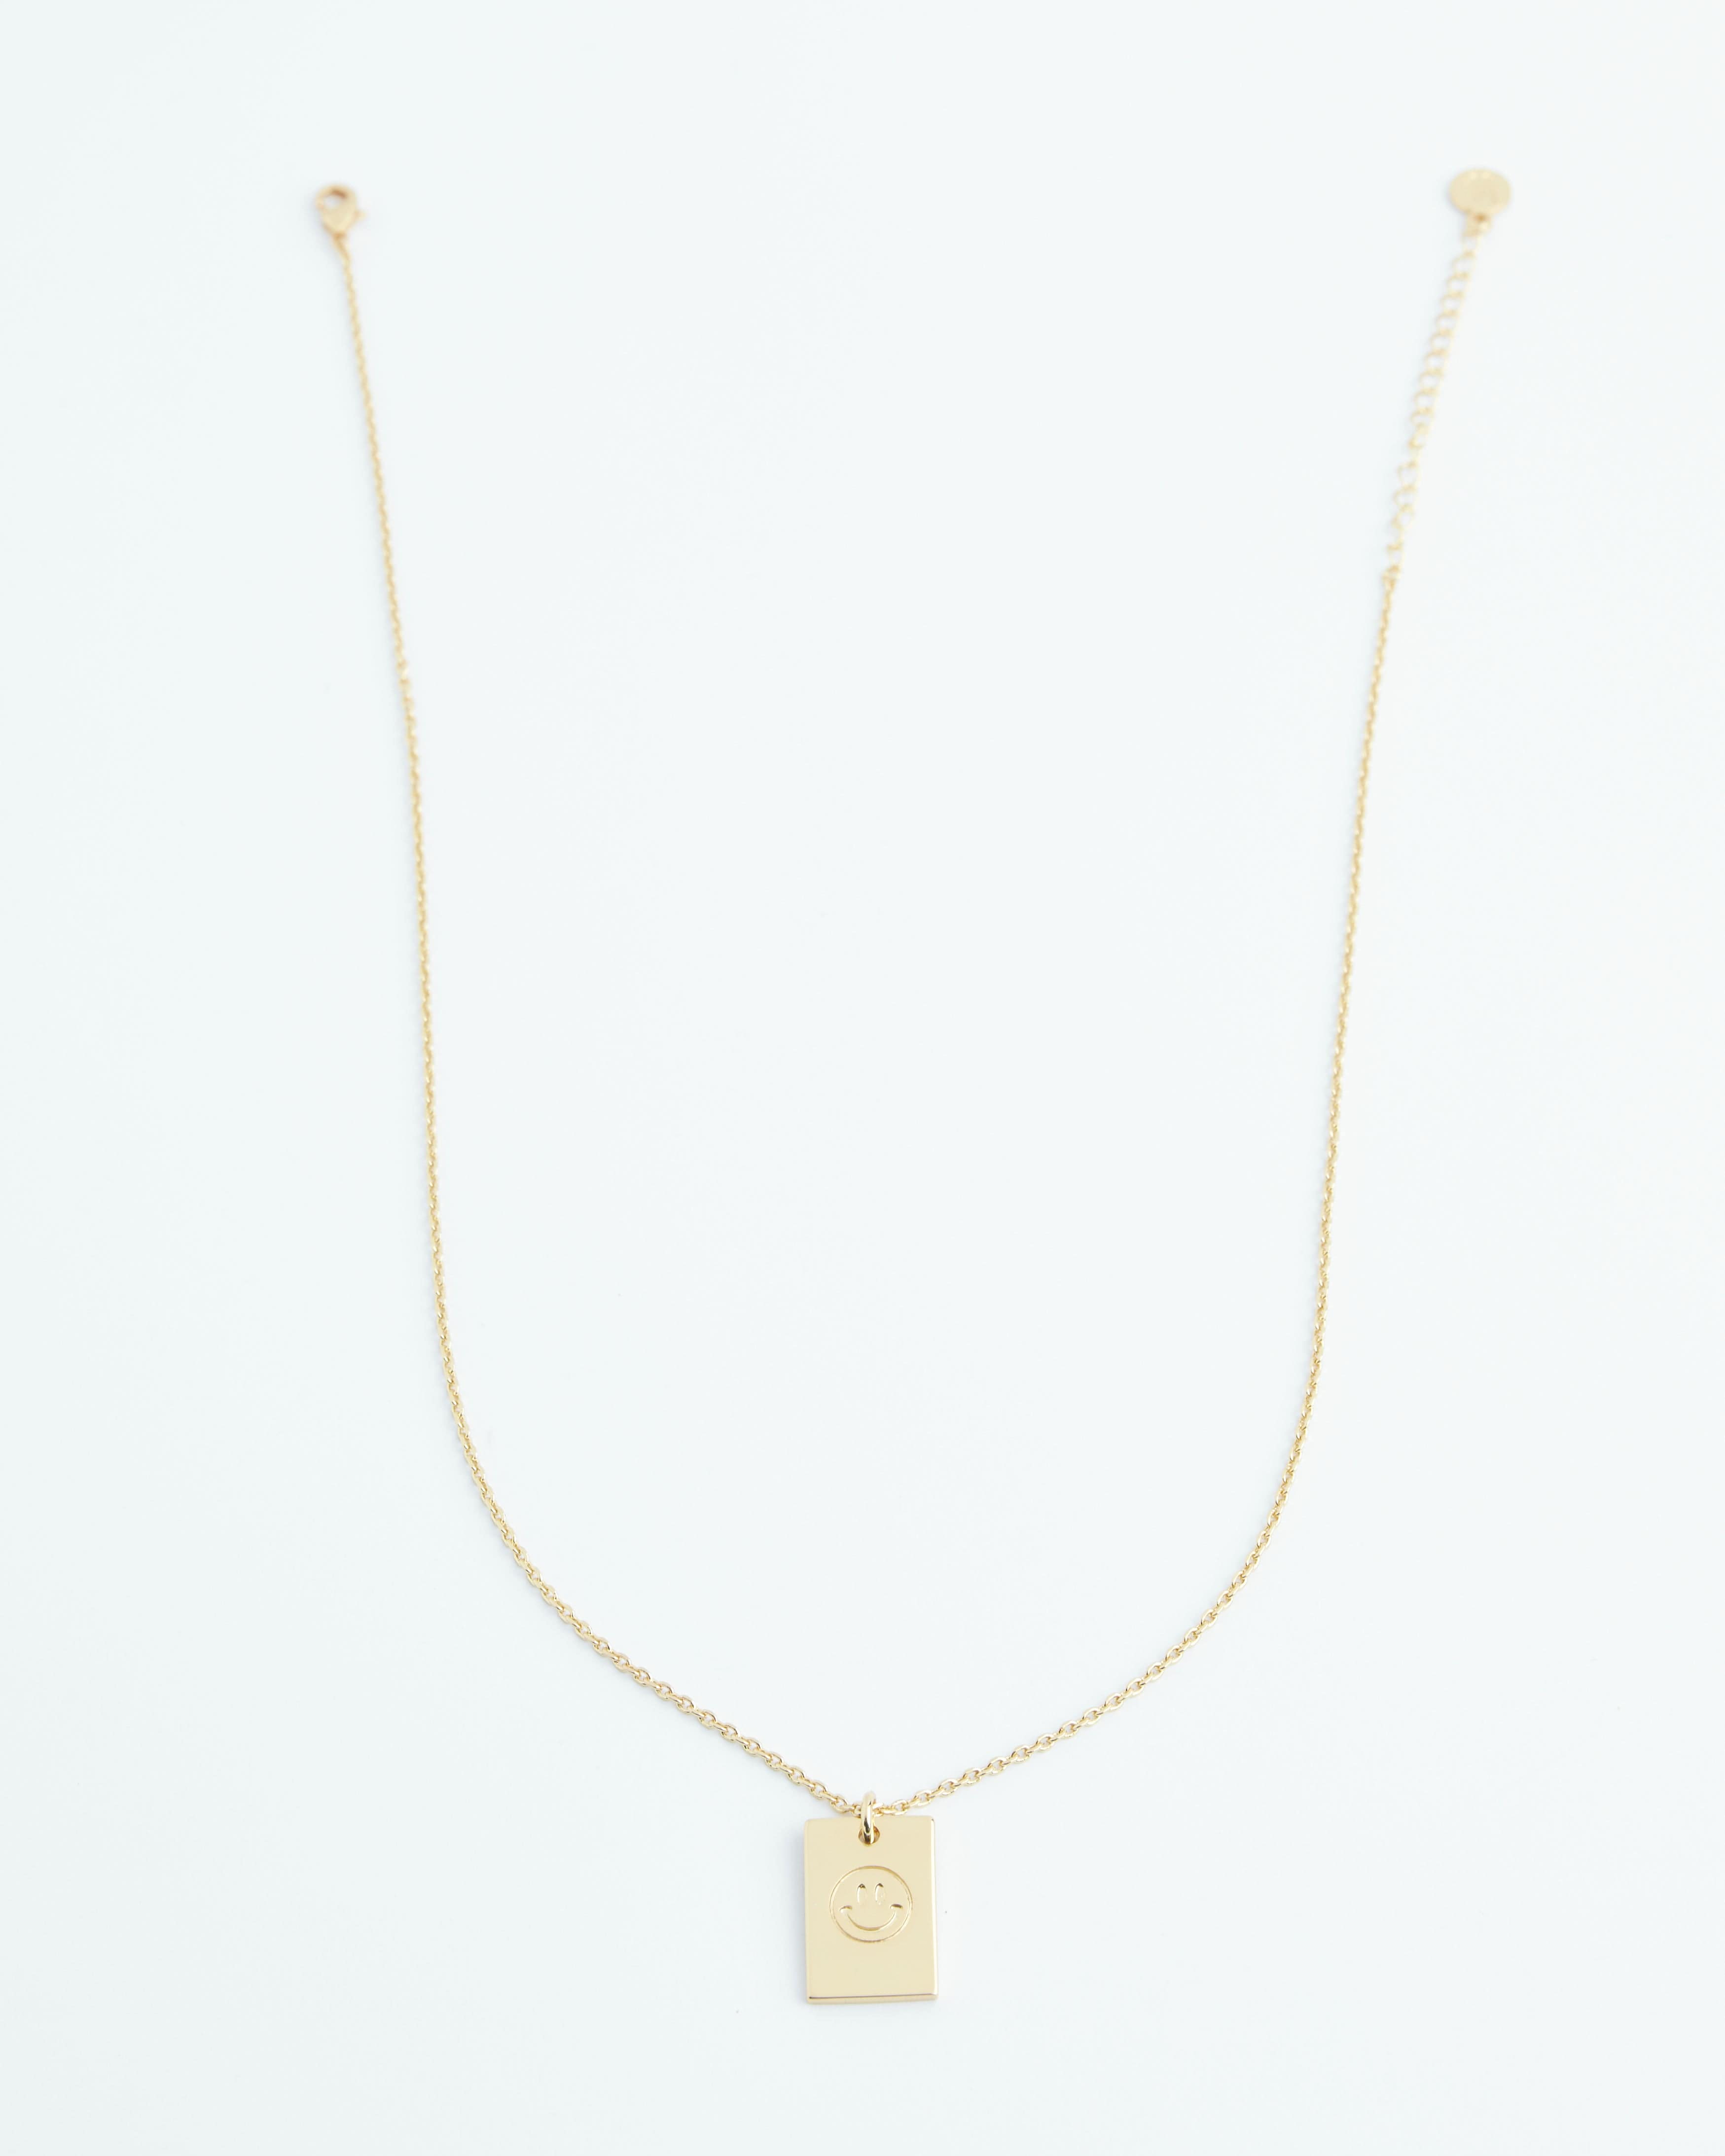 Gold necklace with smiley face on pendant